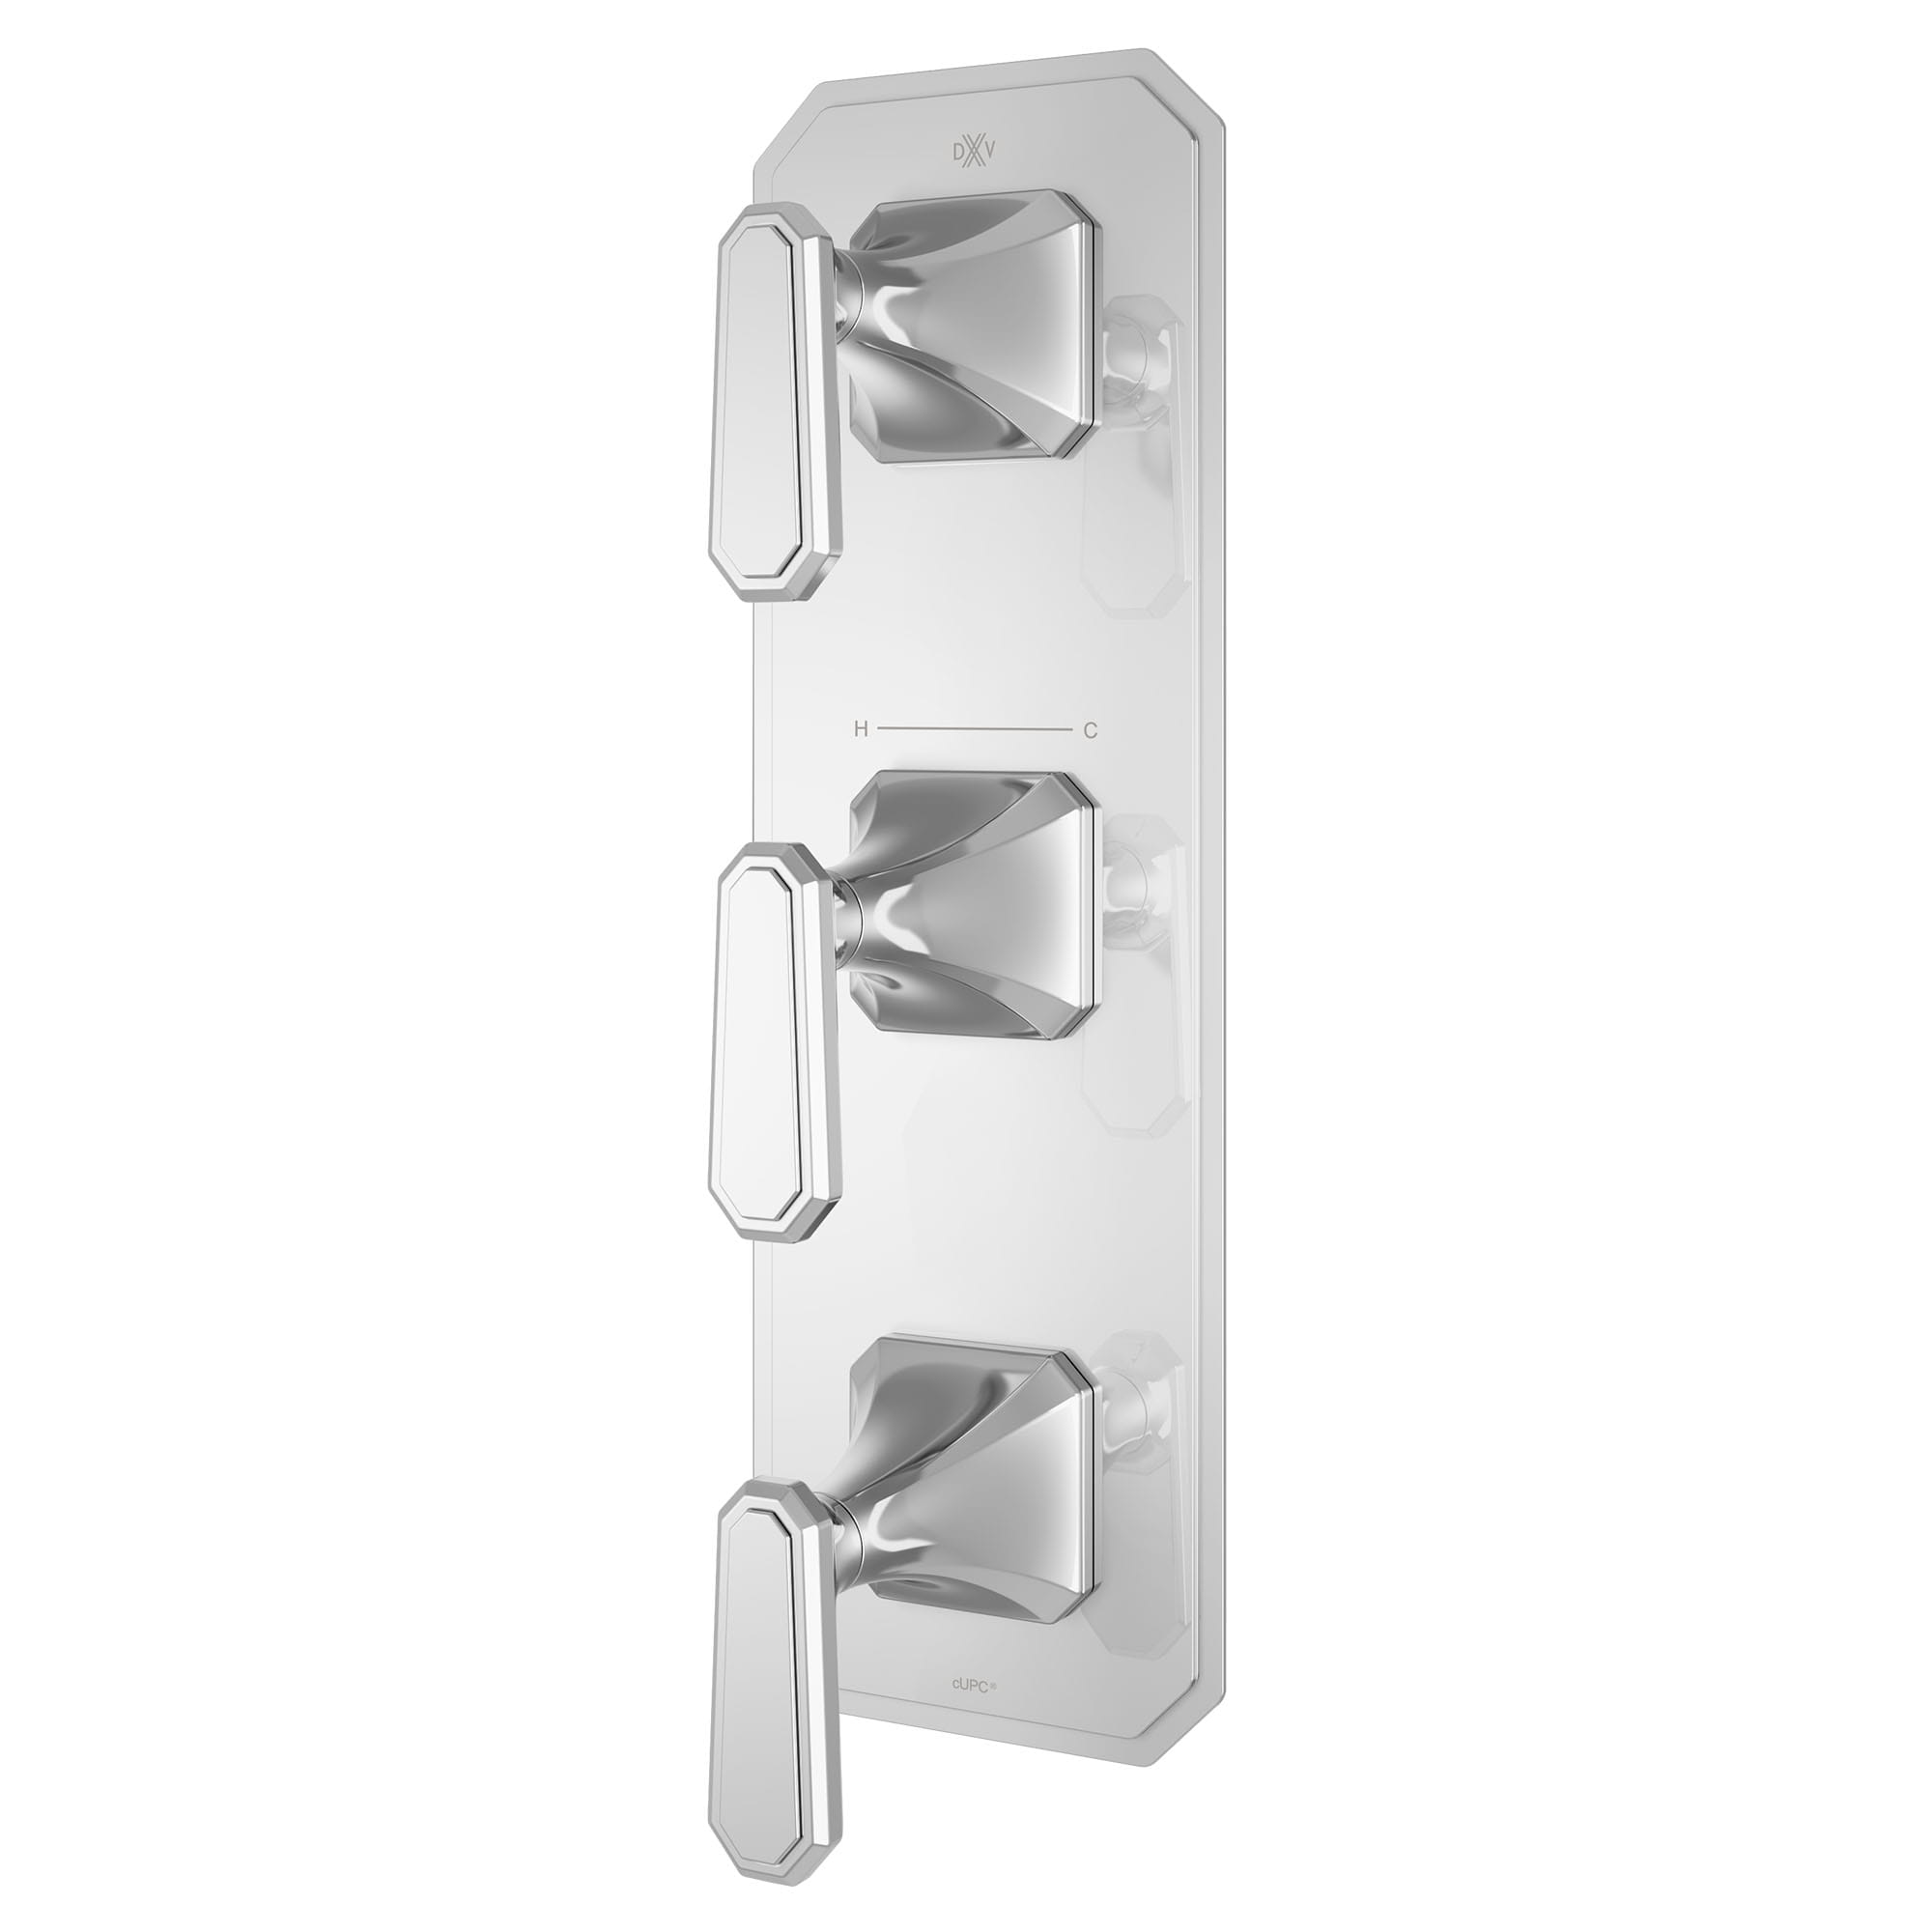 Belshire 3-Handle Thermostatic Valve Trim Only with Lever Handles